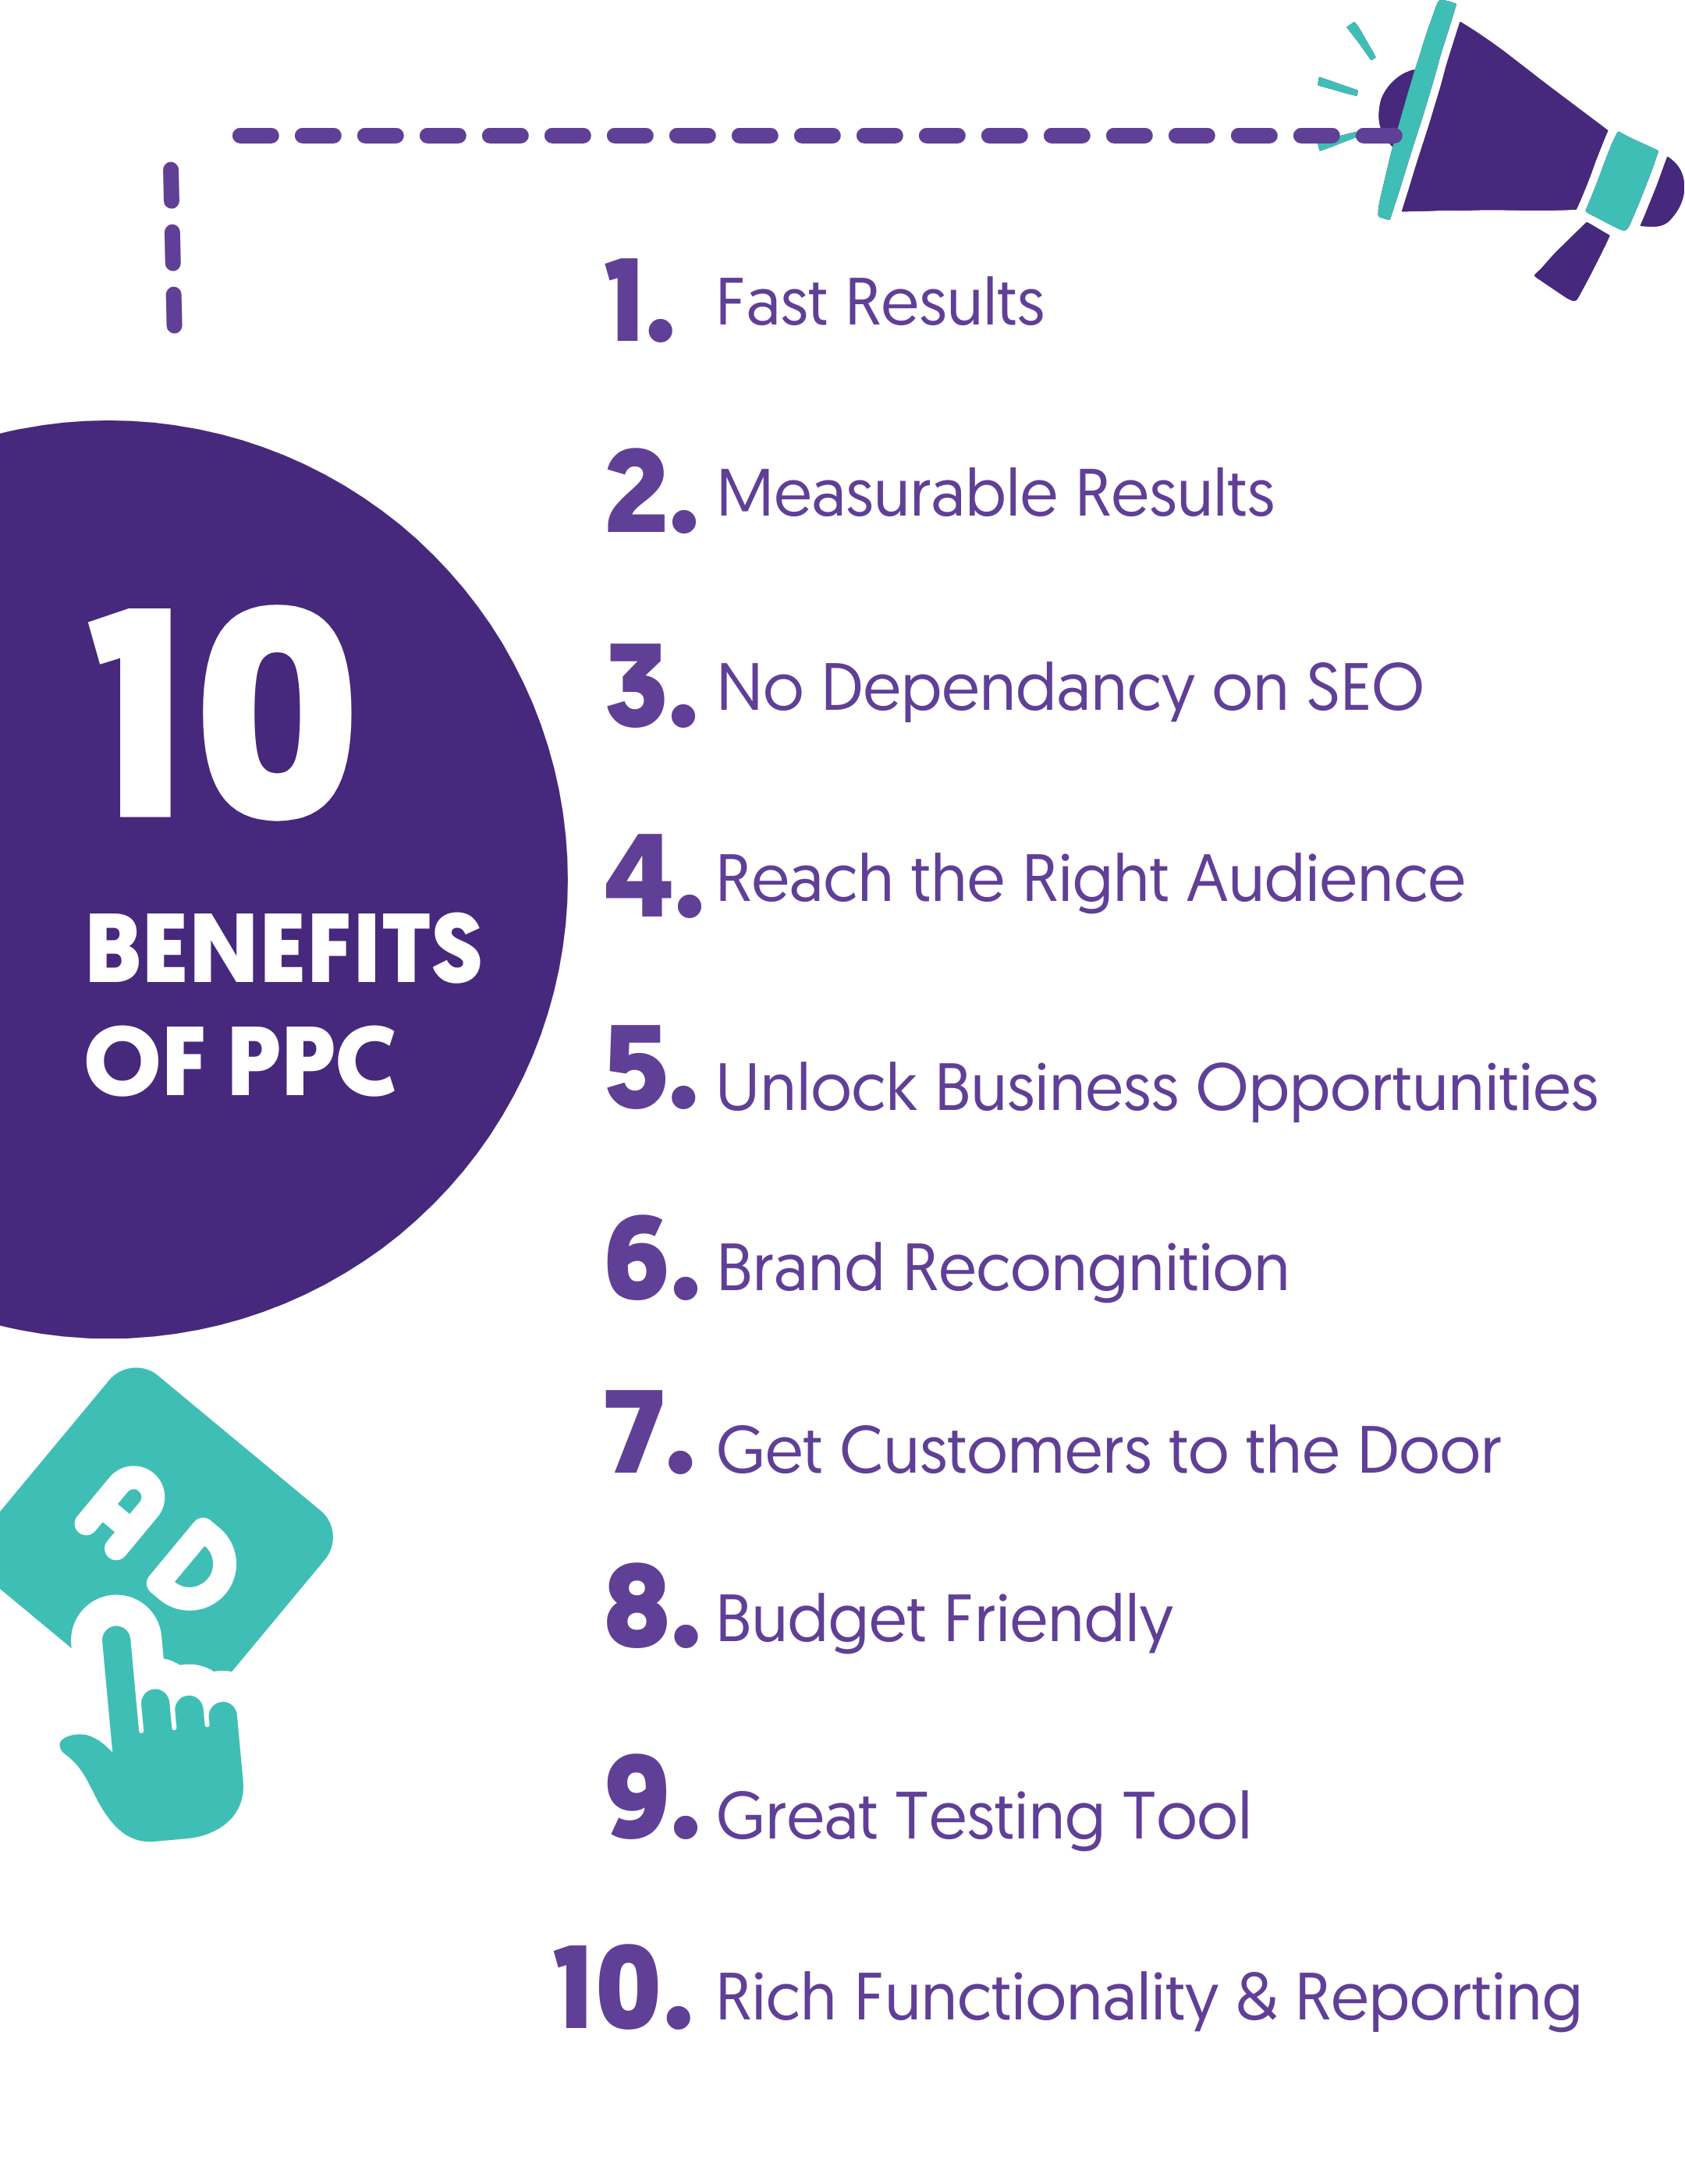 The Benefits of PPC Injections for Improved Marketing